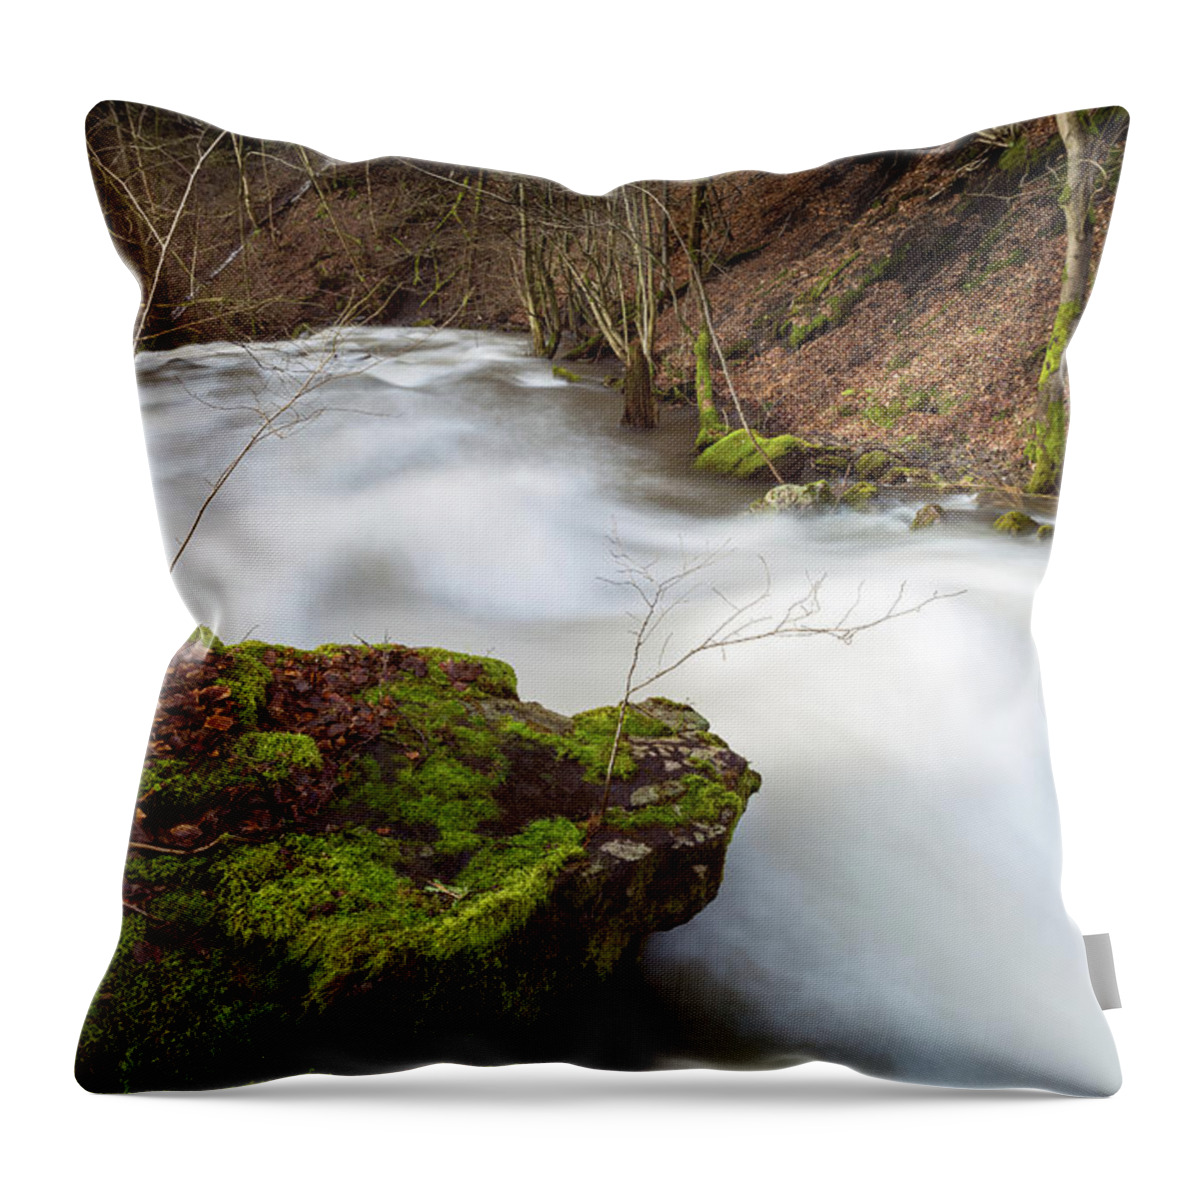 Outdoors Throw Pillow featuring the photograph Bere, Harz by Andreas Levi